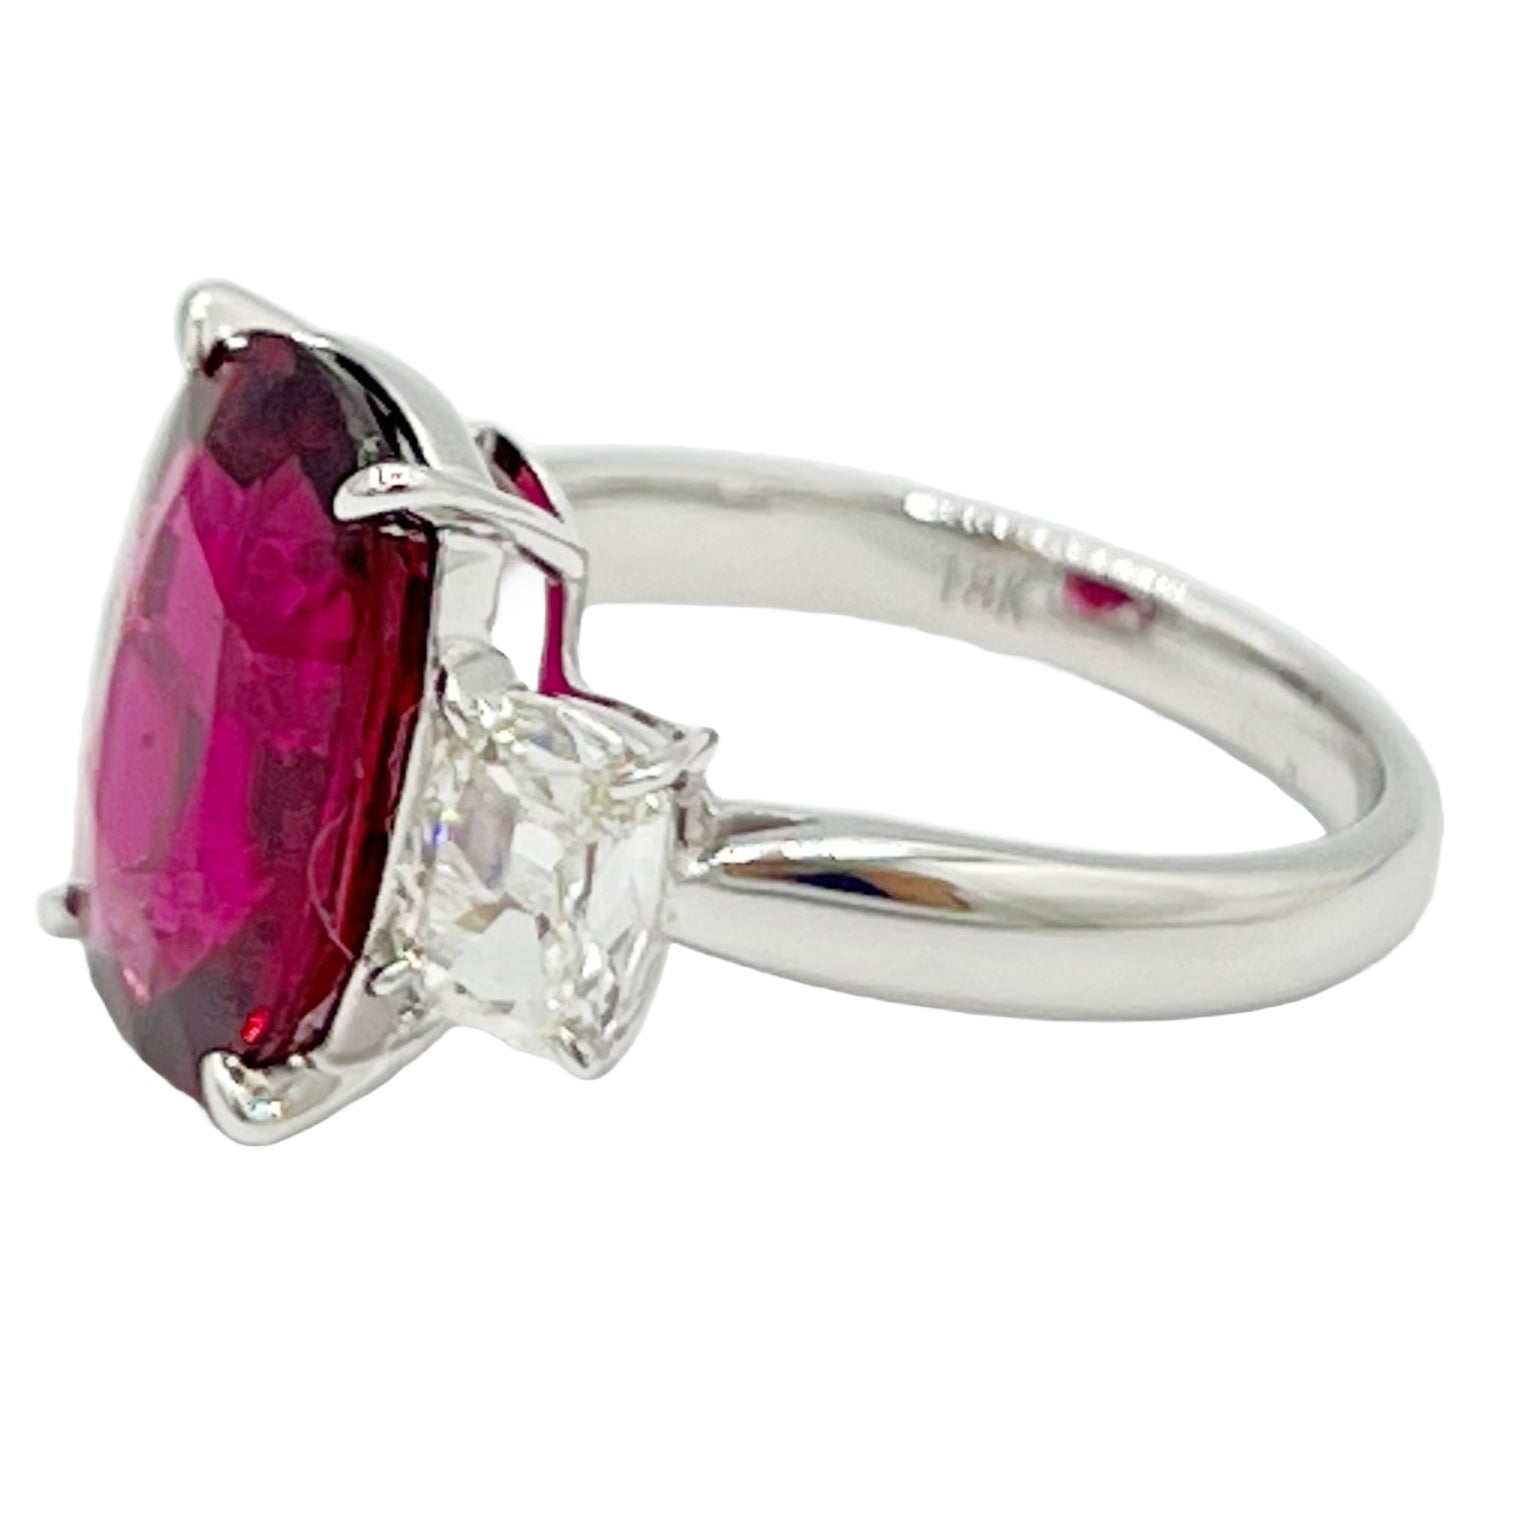 Ring 18KW/4.2G 1RUBEL-4.96CT 2RD-0.98CT